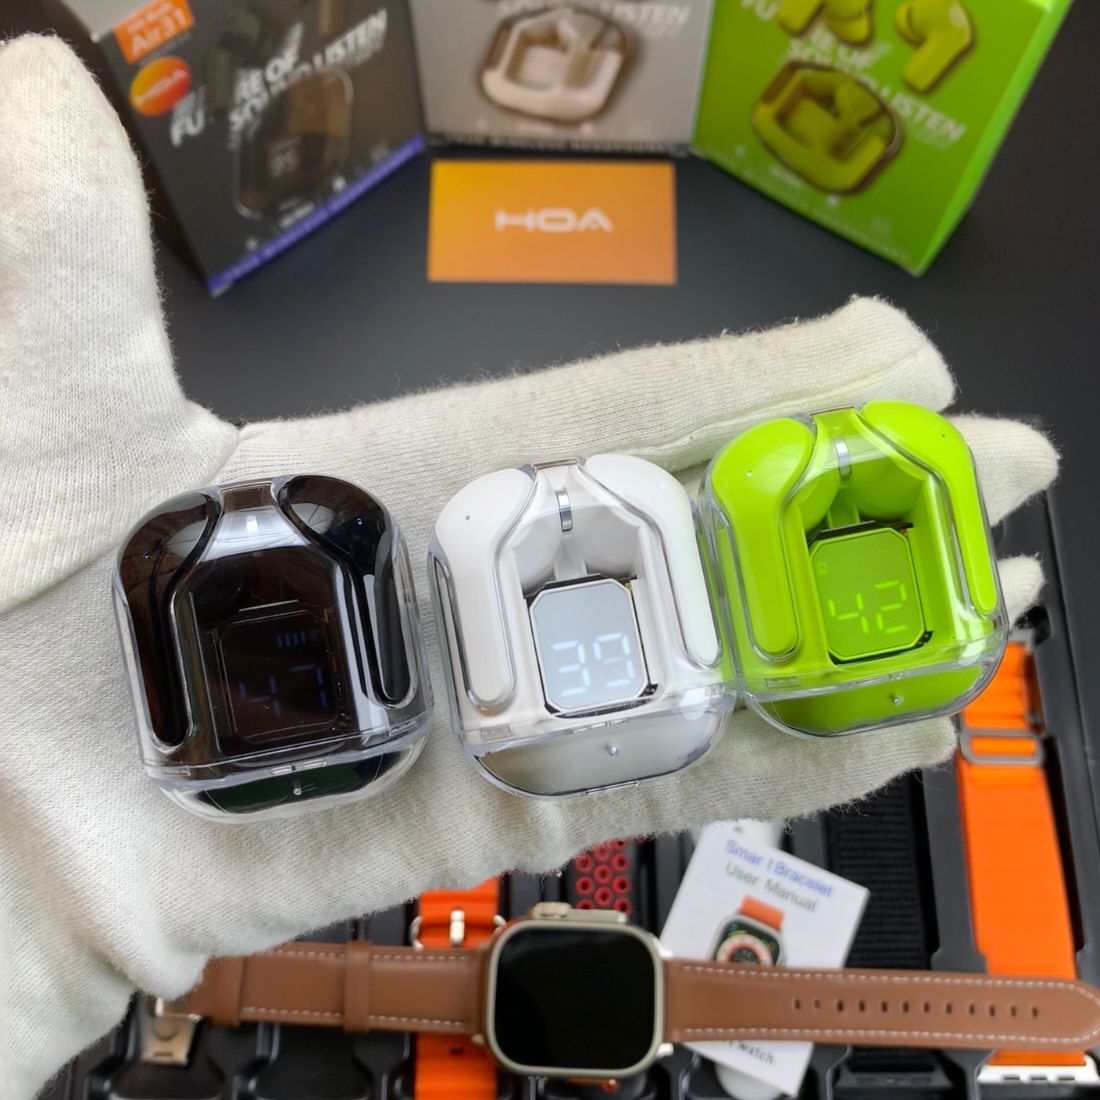 DT900 ULTRA SMARTWATCH WITH FREE AIR31 AIRPODS